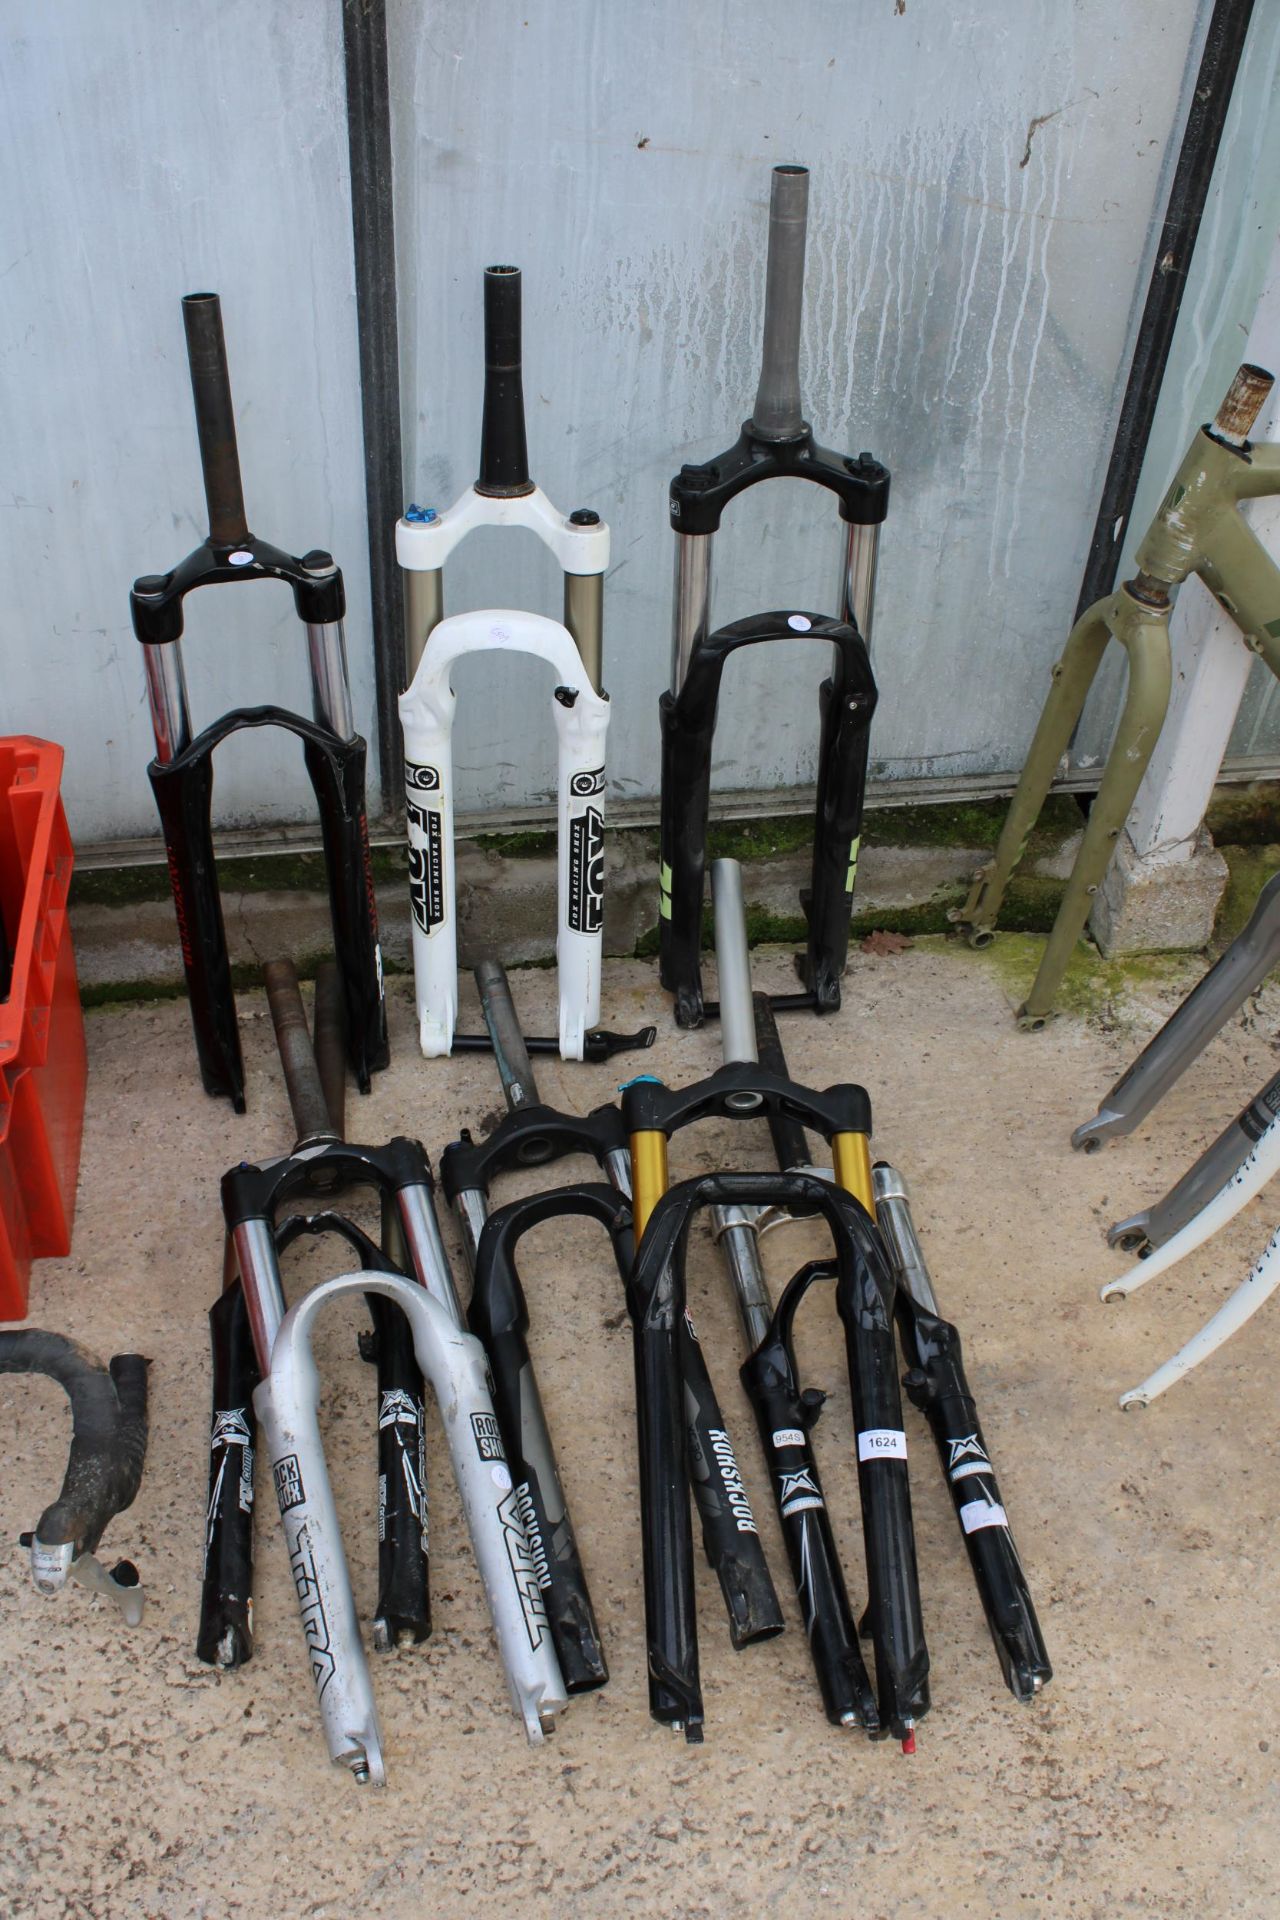 AN ASSORTMENT OF BIKE FRONT FORKS WITH SUSPENSION